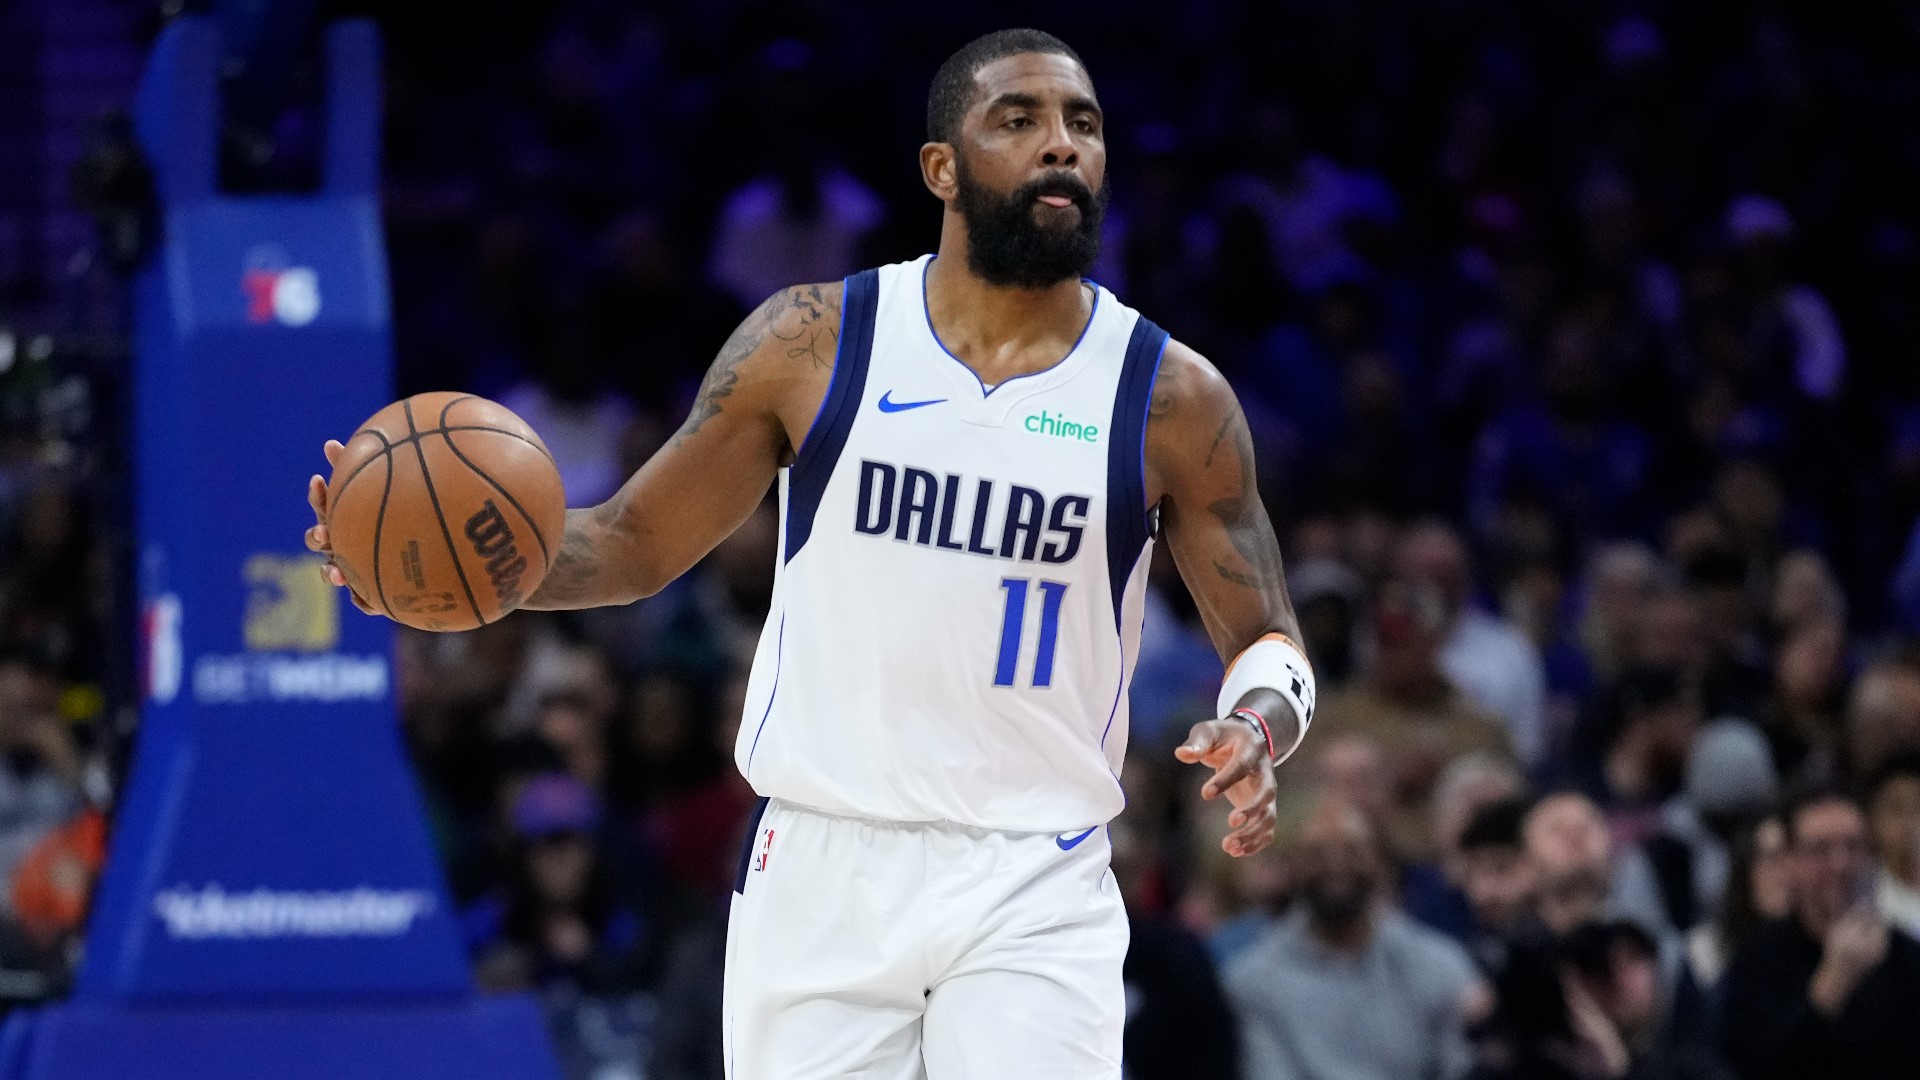 Kyrie Irving scored 36 points in a dazzling return to Brooklyn exactly one year after he was traded to Dallas, leading the Mavs to a 119-107 victory over the Nets.